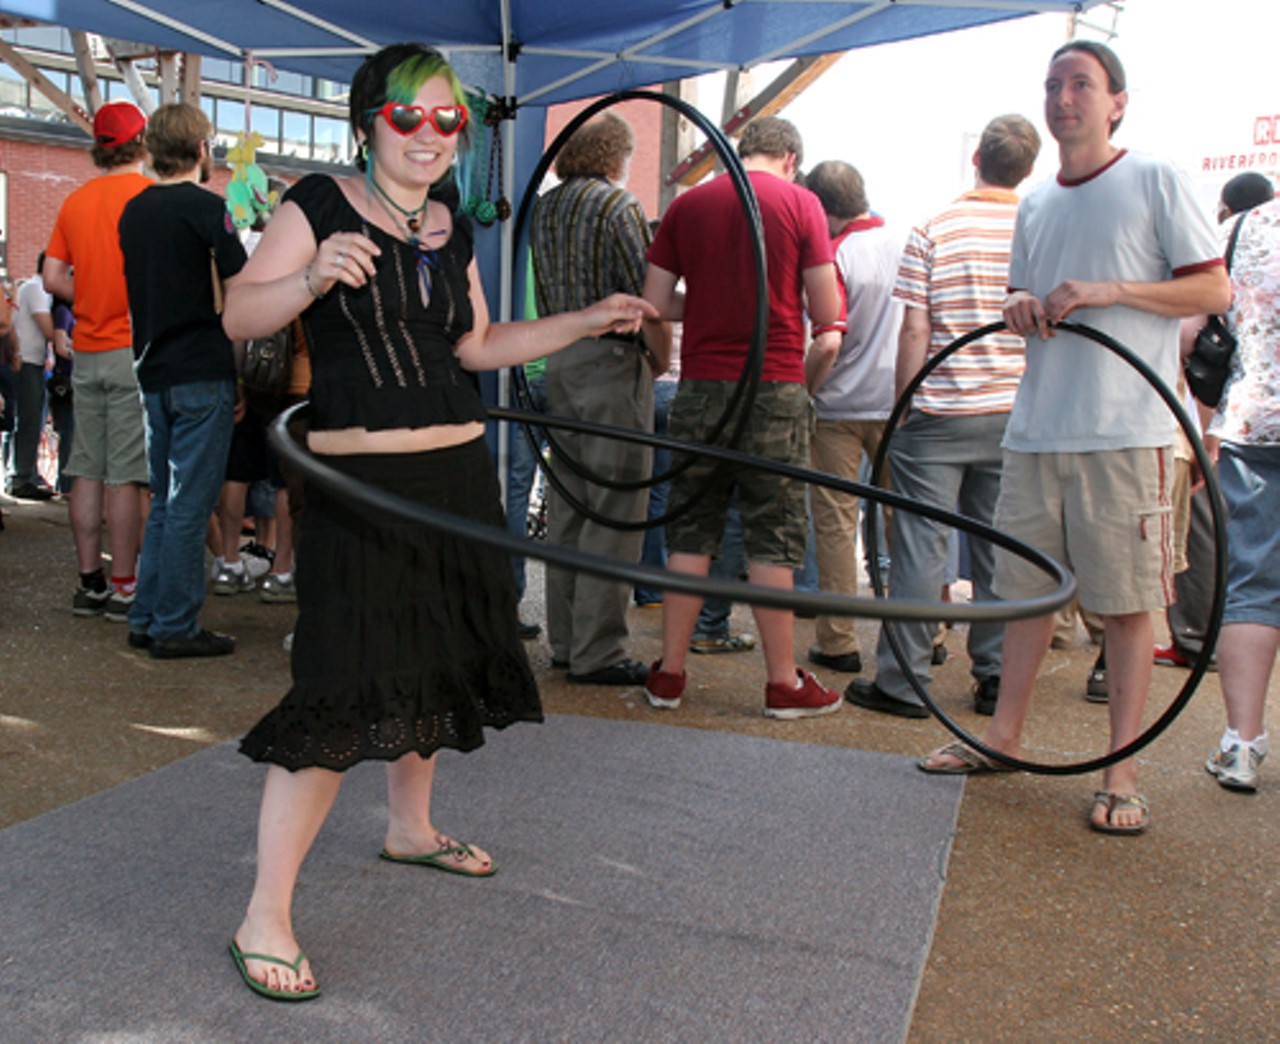 Anna Spitz hula-hoops in The Loop, which she had not done in a while.